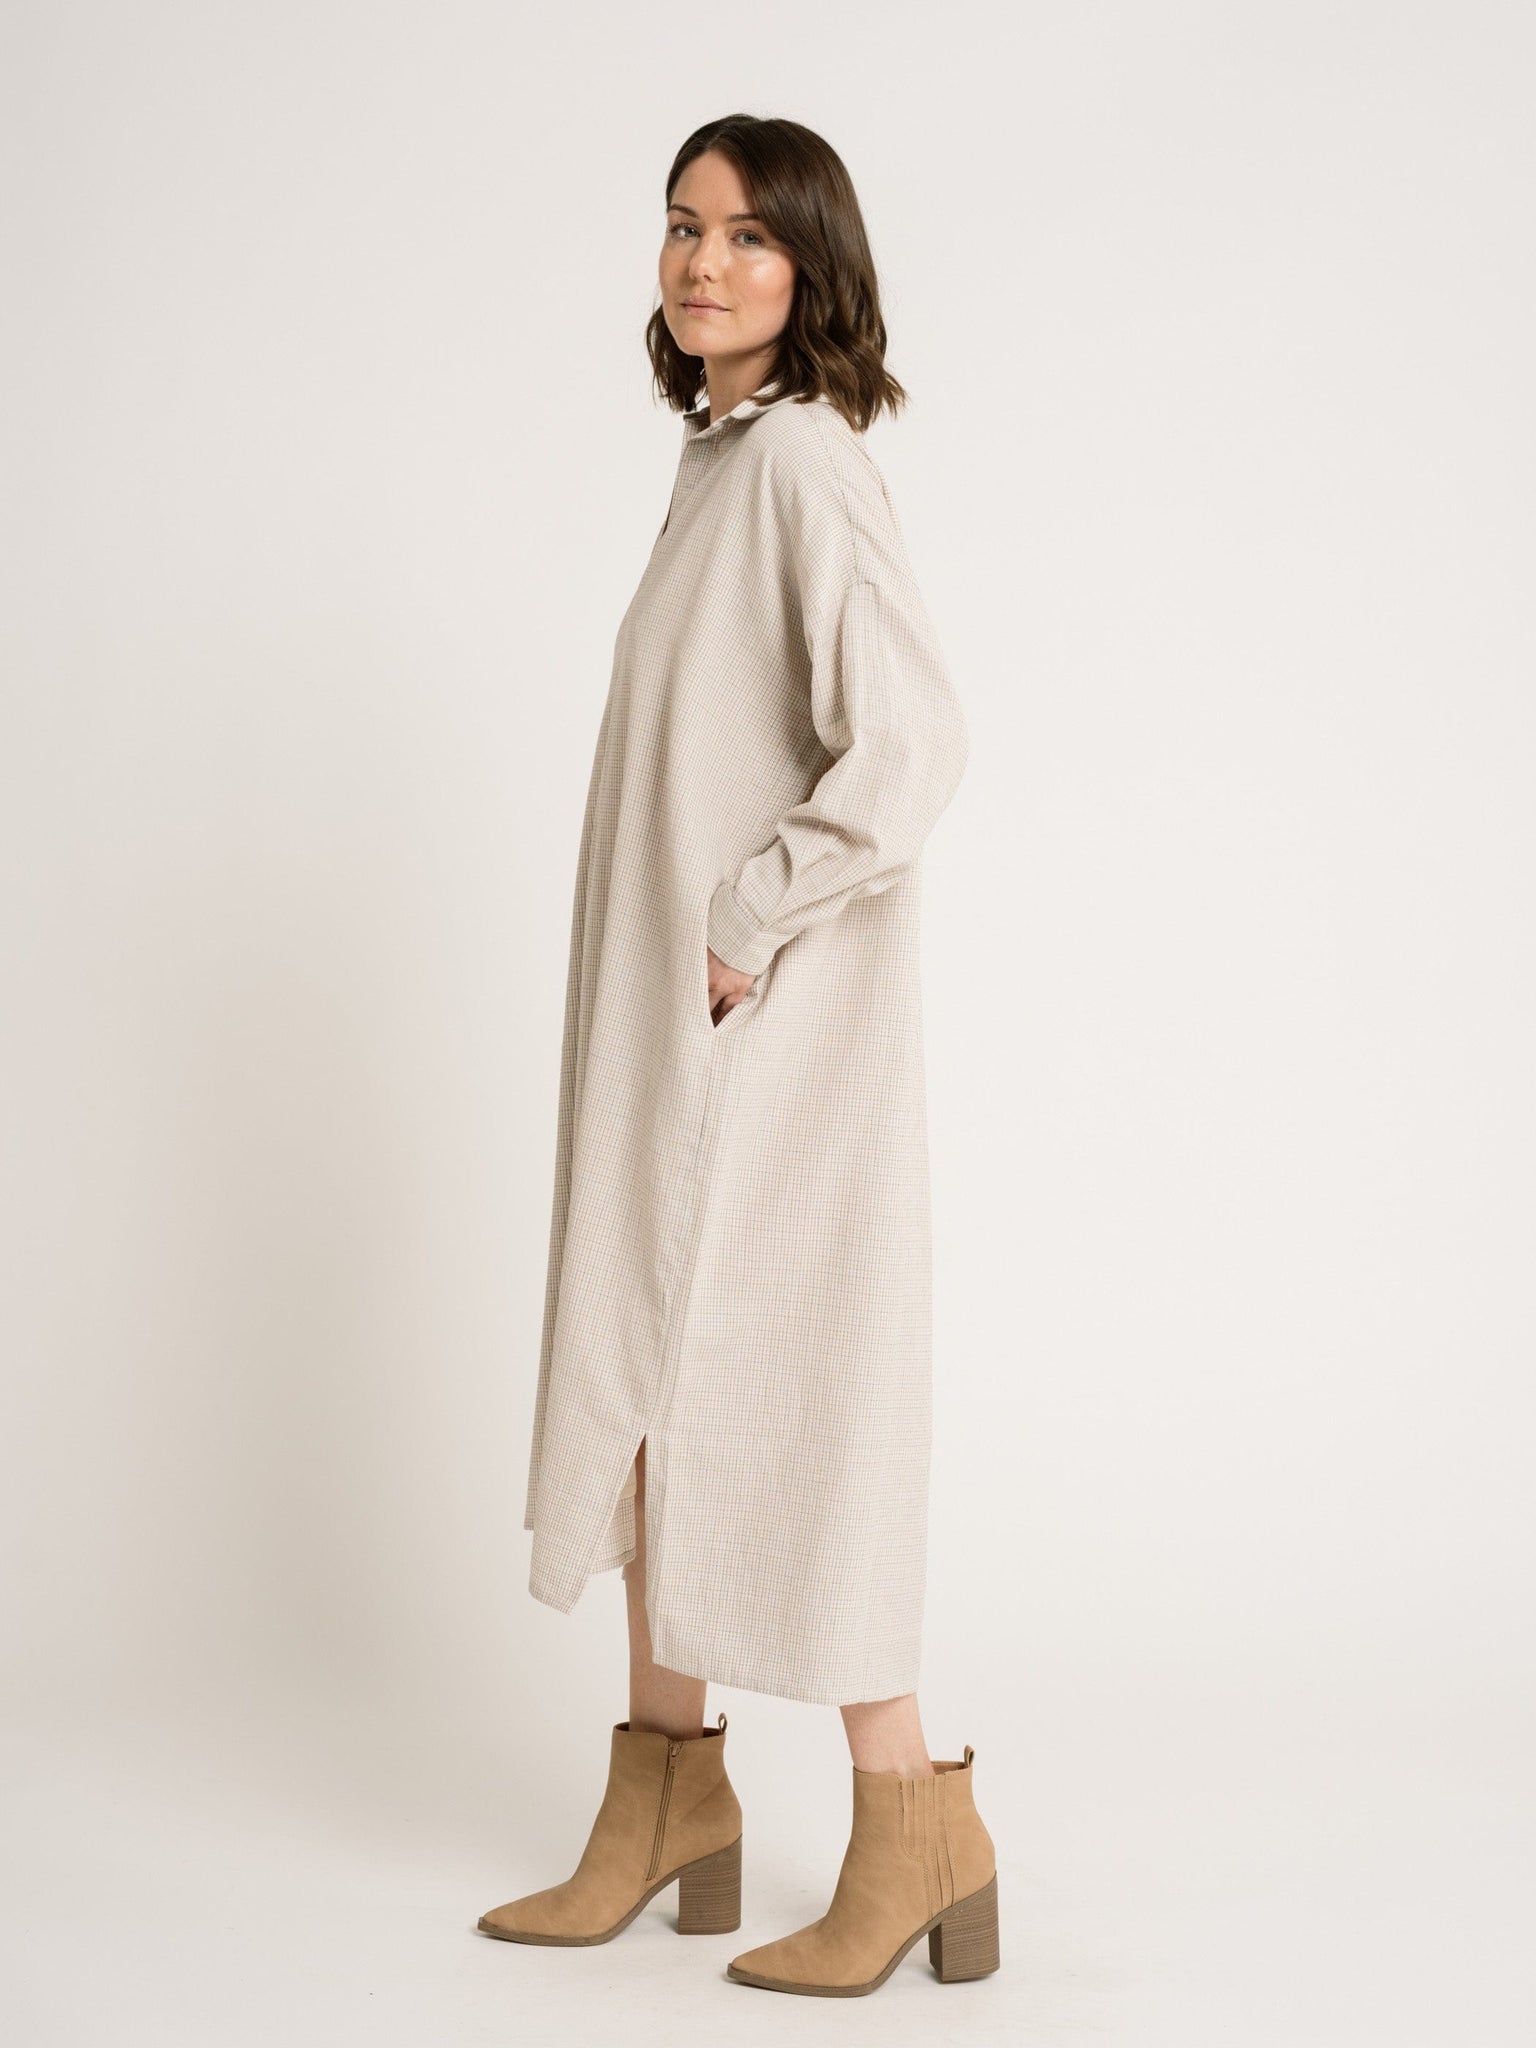 The model is wearing an Oversized Tunic Dress - Dove Small Grid made of organic cotton with tan boots.